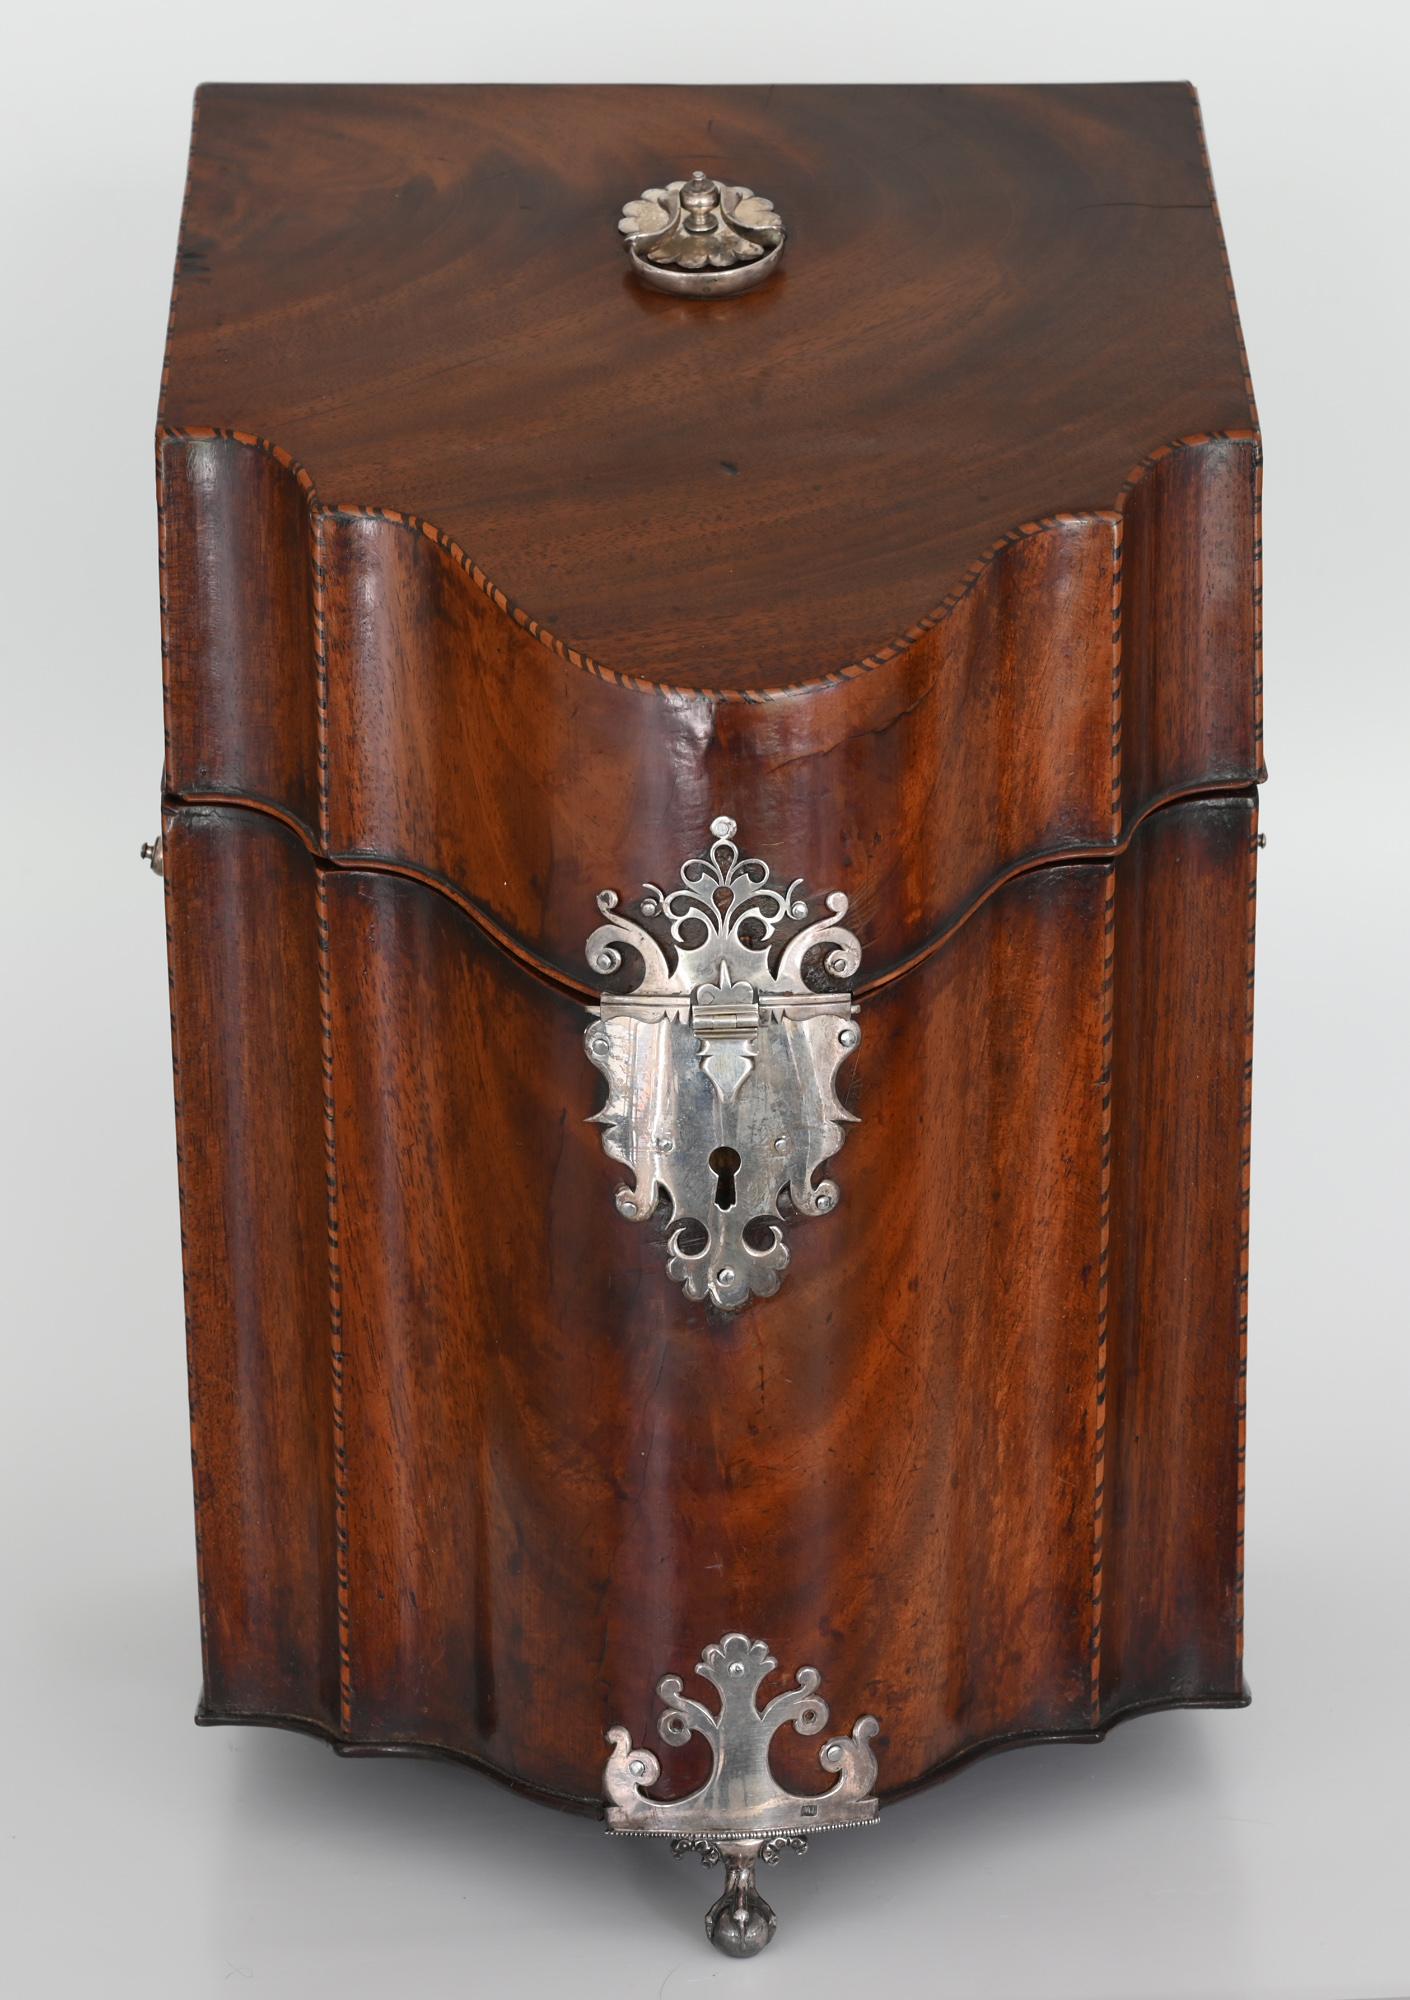 Mahogany cutlery box, Georgian end of 18th century, silver fittings, Weldrington

This serpentuine form box was made of beautiful flame mahogany and has herring bone pattern fruitwood stringing and interior edges. The cutlery box is made with